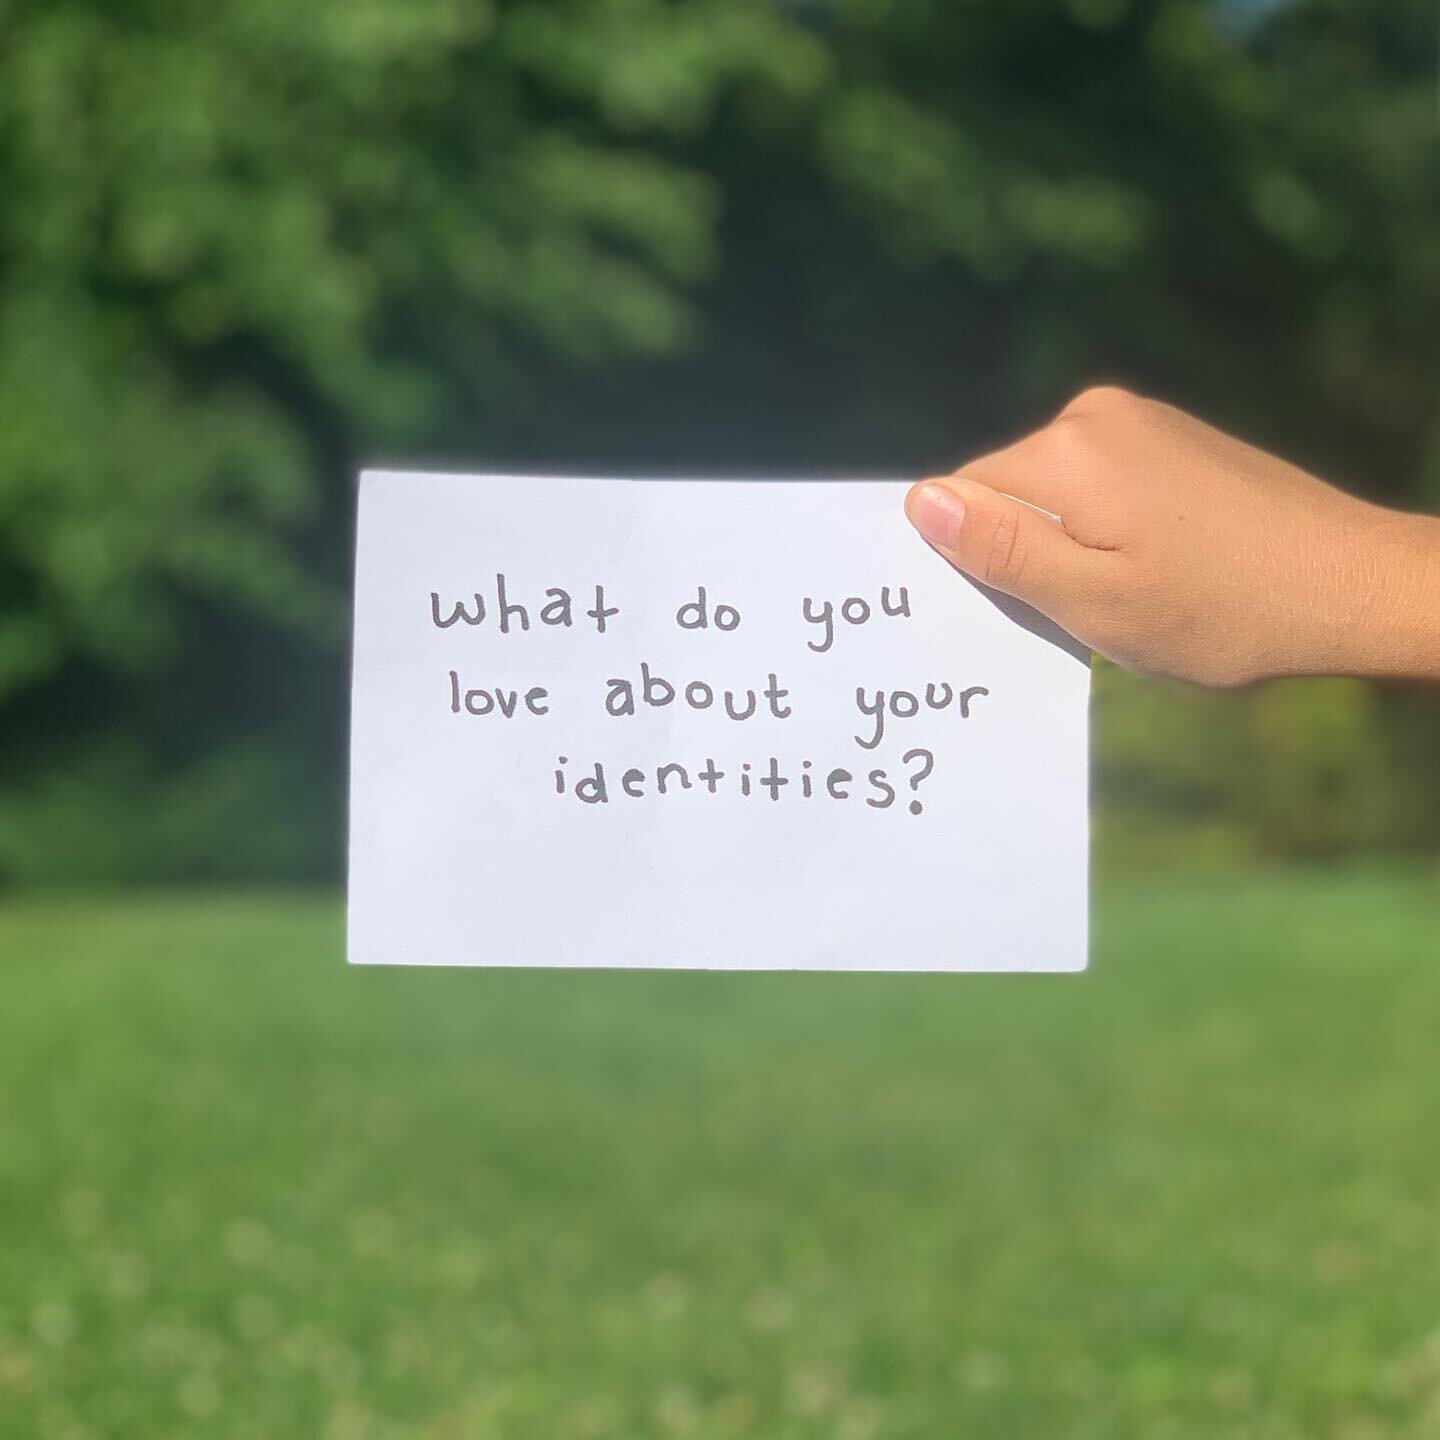 During #pridemonth events in Pittsburgh, we&rsquo;ve been asking friends who visited our table to answer some questions on queerness. Here are some community members&rsquo; responses; stay tuned for more questions + answers! 🧡 #pride #queer #lgbtqia